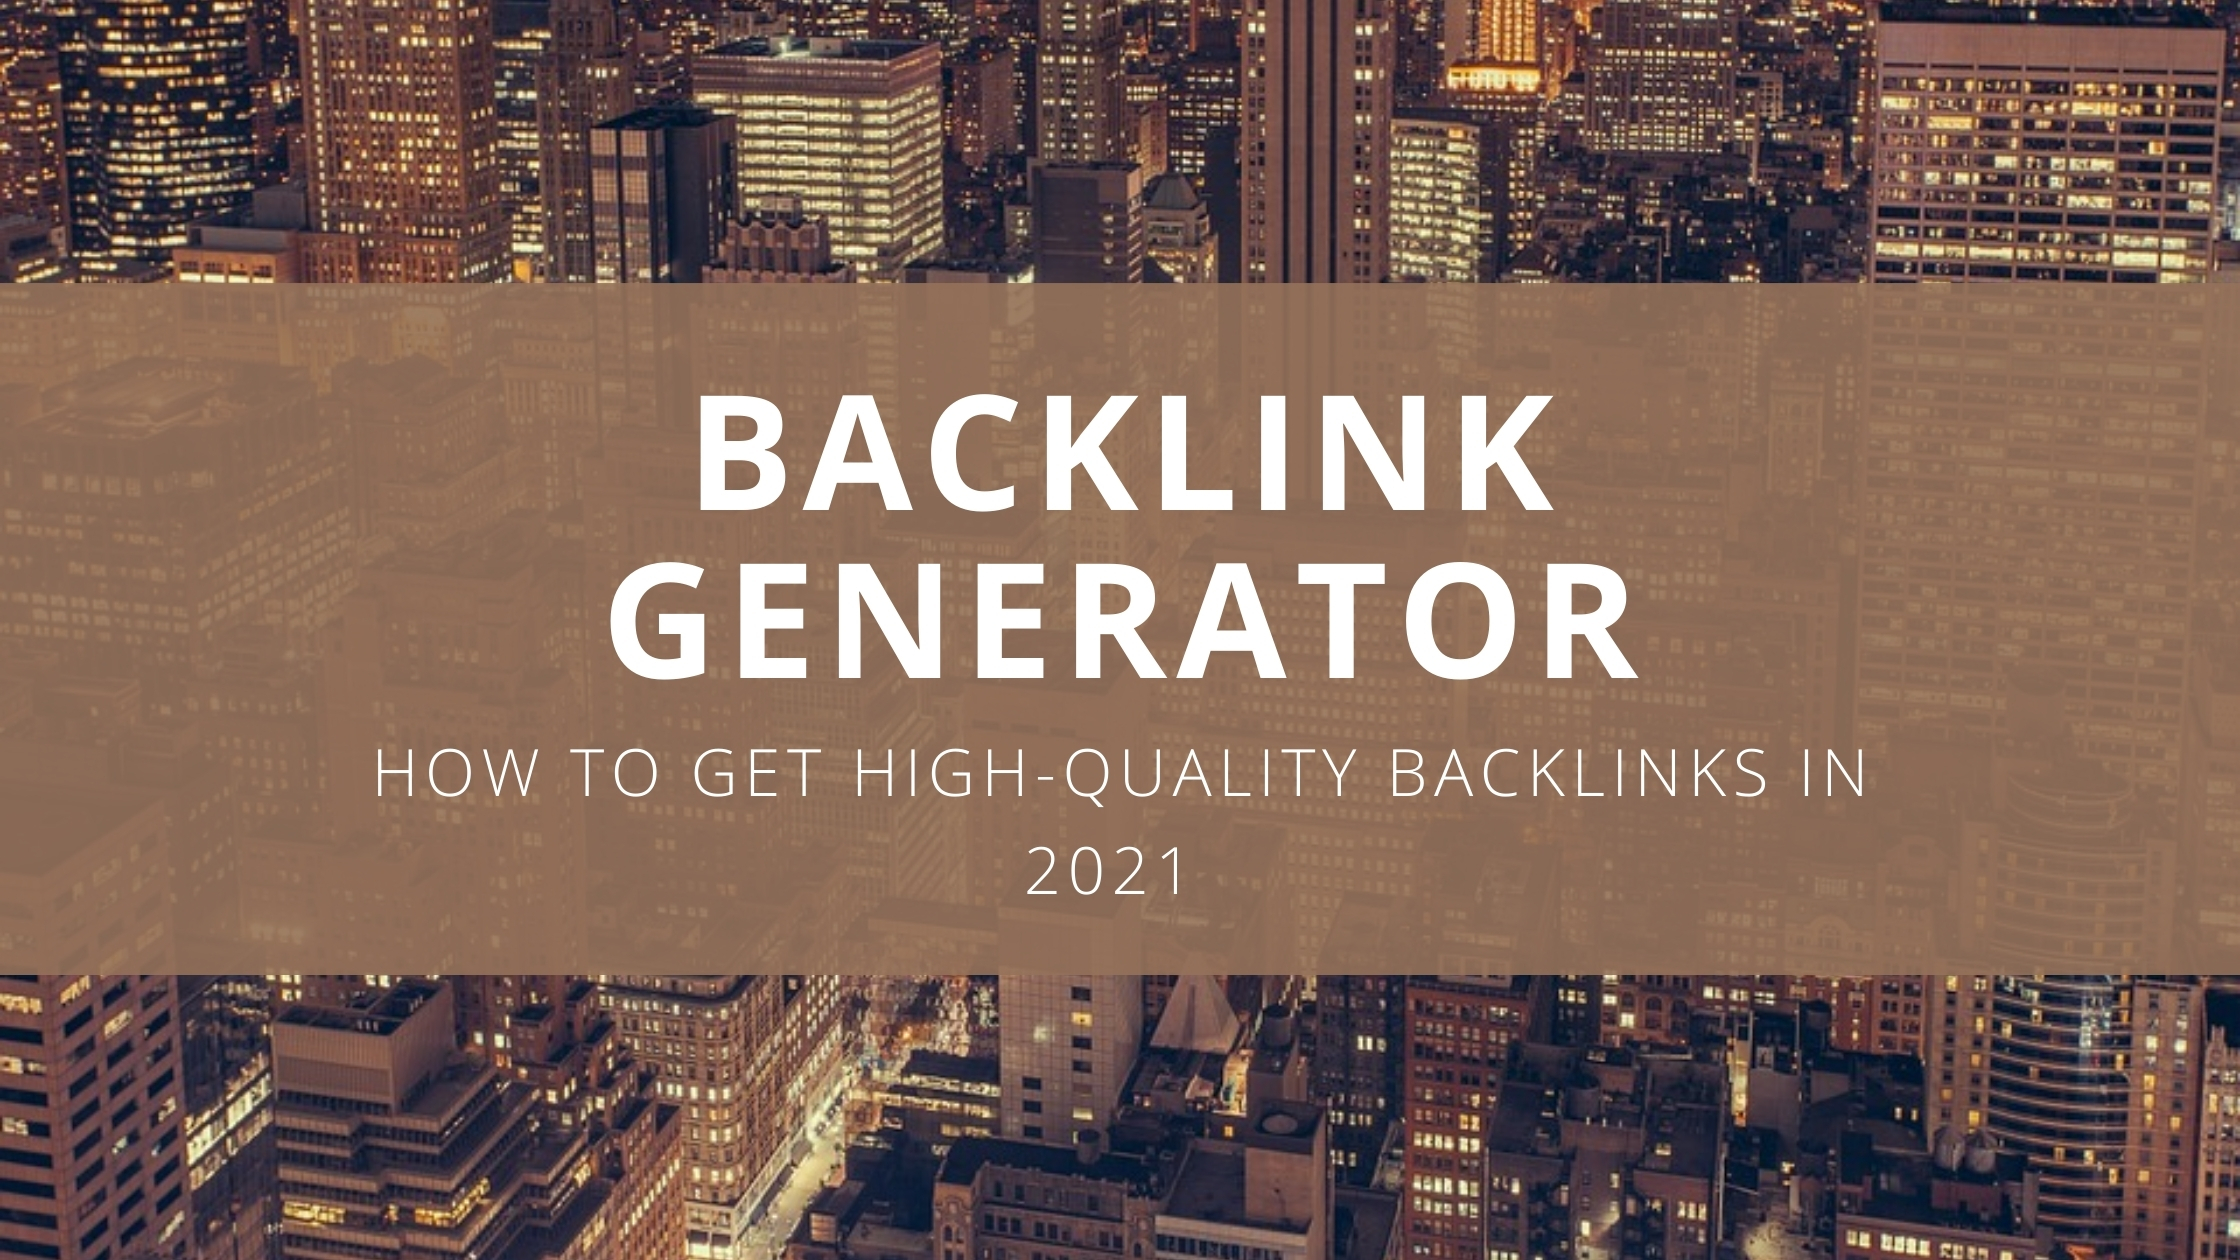 How To Get High-Quality Backlinks In 2021 